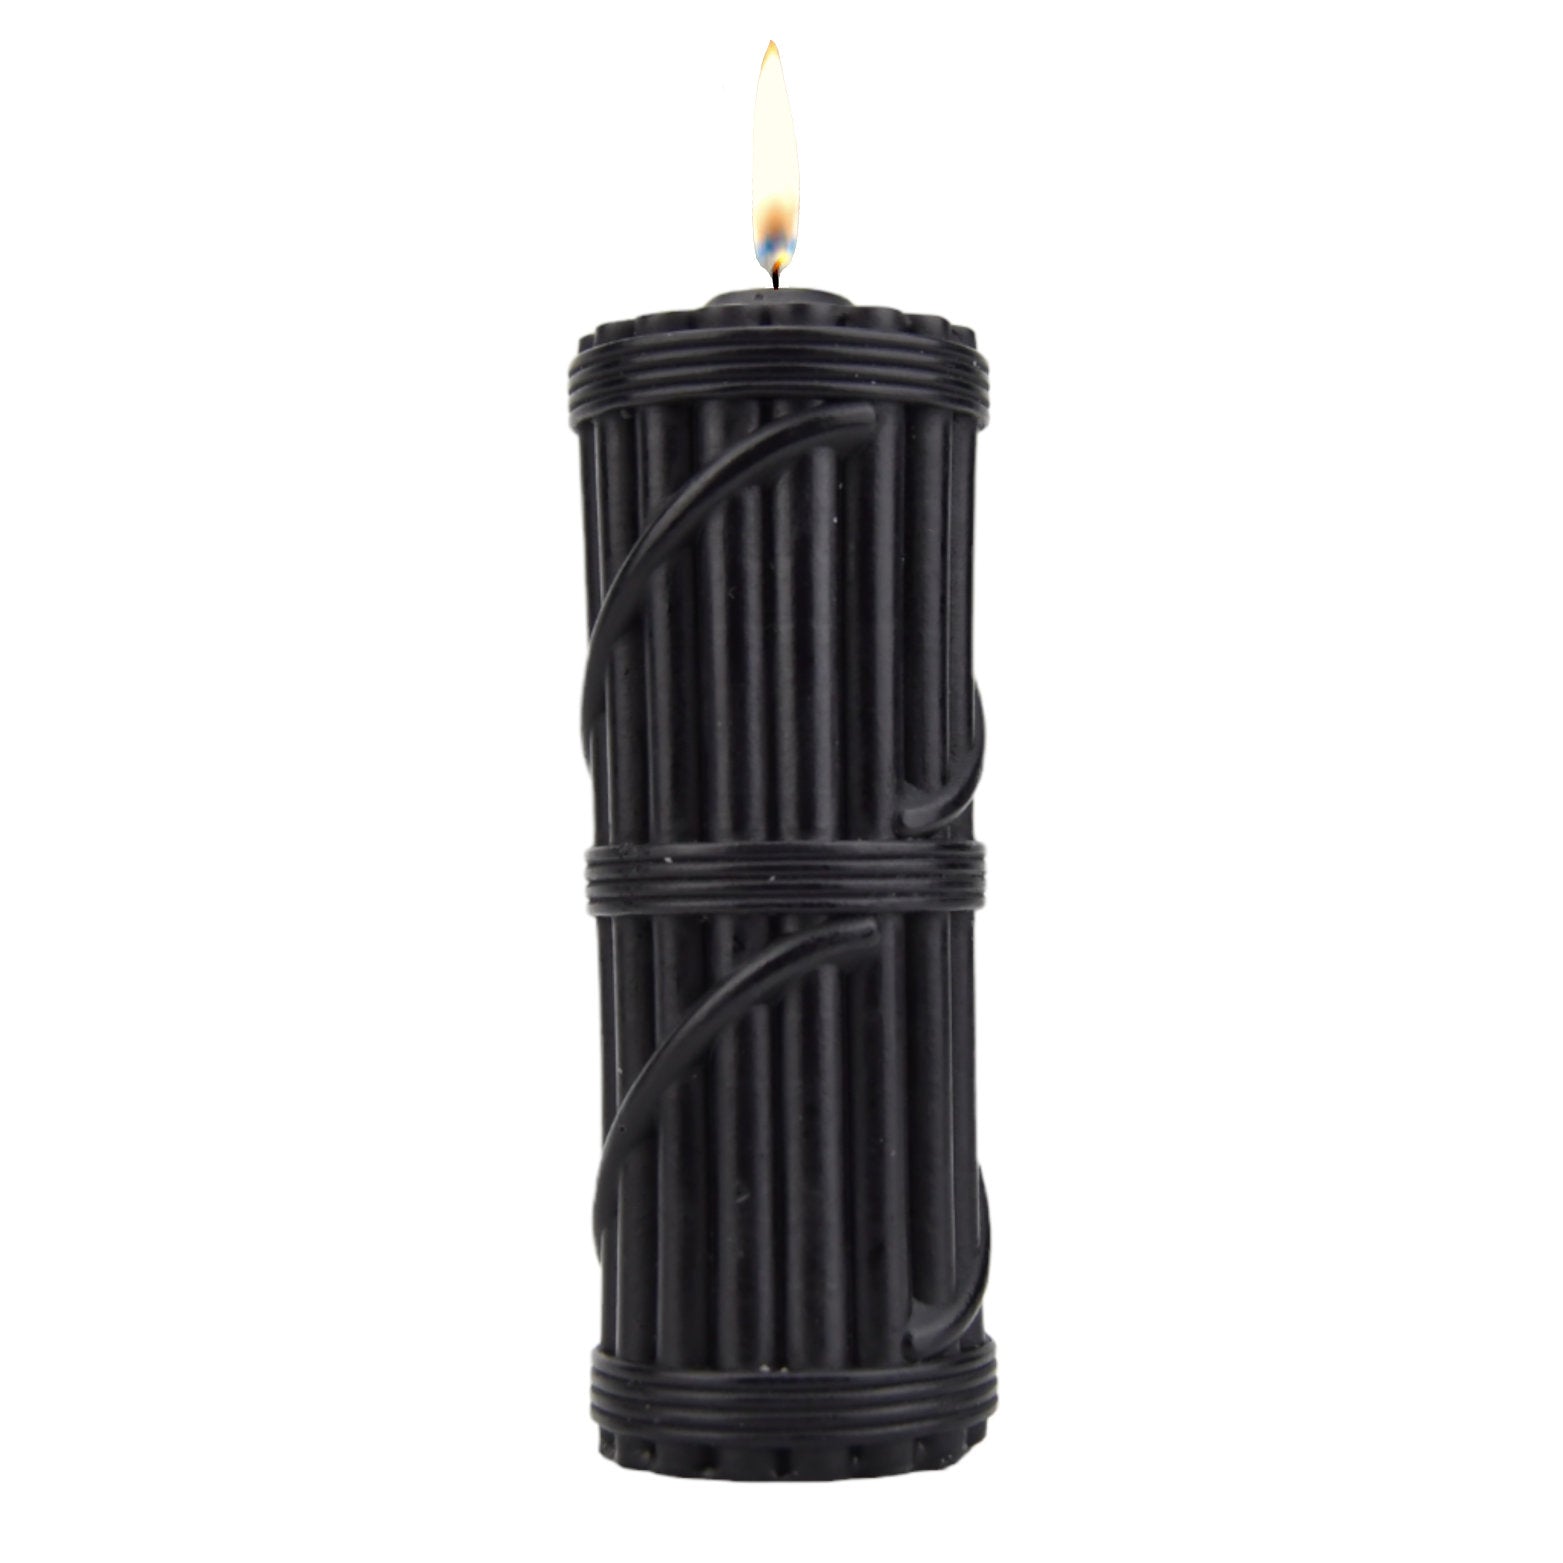 Bound to Play. Hot Wax Candle Black - PL4YHOUSE - PL4YHOUSE - Bound to Play. Hot Wax Candle Black - Bound to Play - Massage Oils and Candles - Bound to Play. Hot Wax Candle Black - {{ sex }} - {{ adult_toys }} - {{ UK }} - {{ christmas }} - {{ anal sex toys }} - {{ bondage }} - {{ dildos }} - {{ essentials }} - {{ male sex toys }} - {{ lingerie }} - {{ vibrators }}